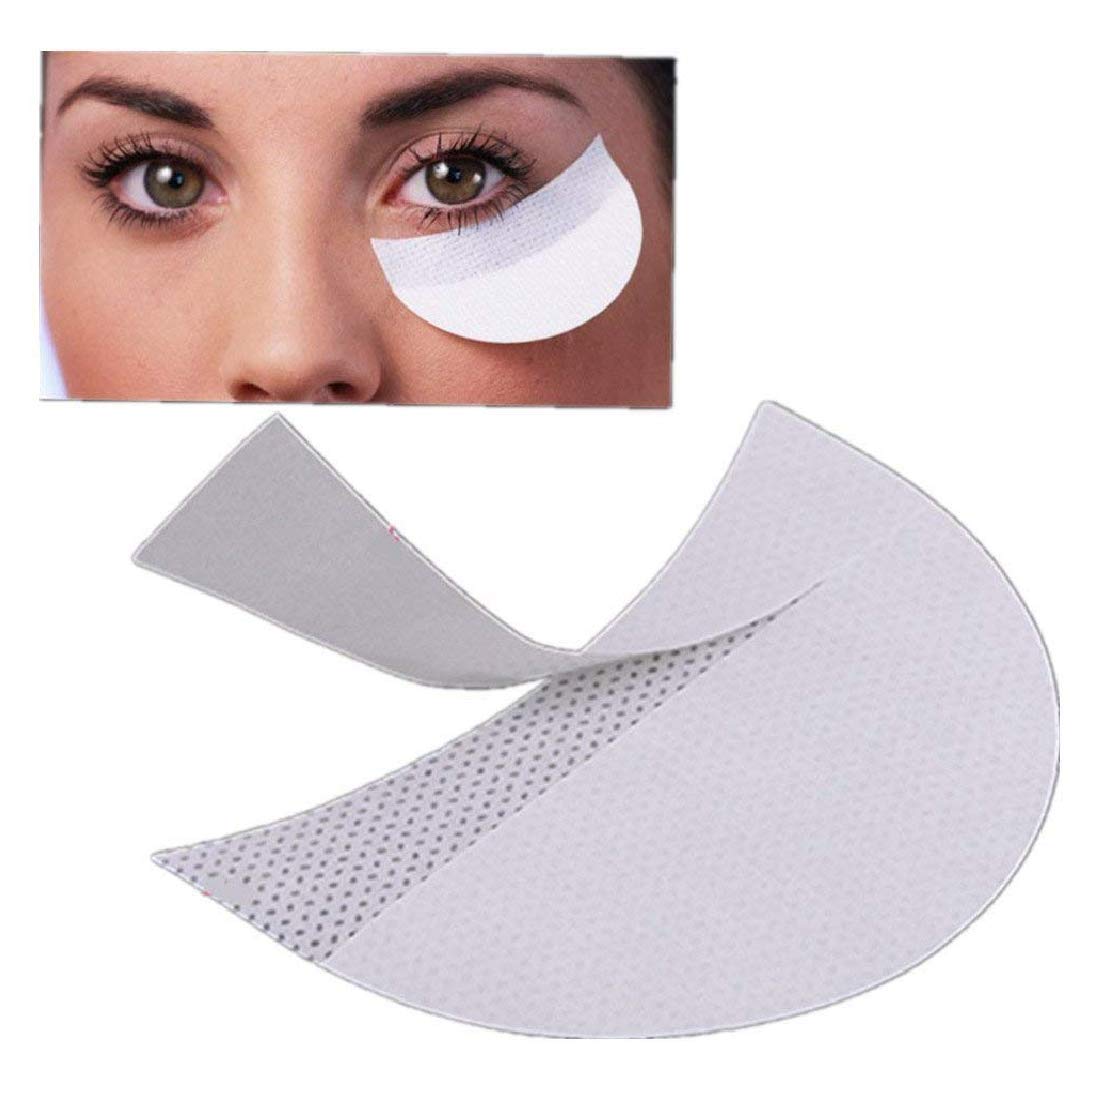 Eyeshadow shields under eye patches Disposable, Prevent Eyelash Extensions Pads for makeup ,Eye Tips Sticker Wrap pad application tool